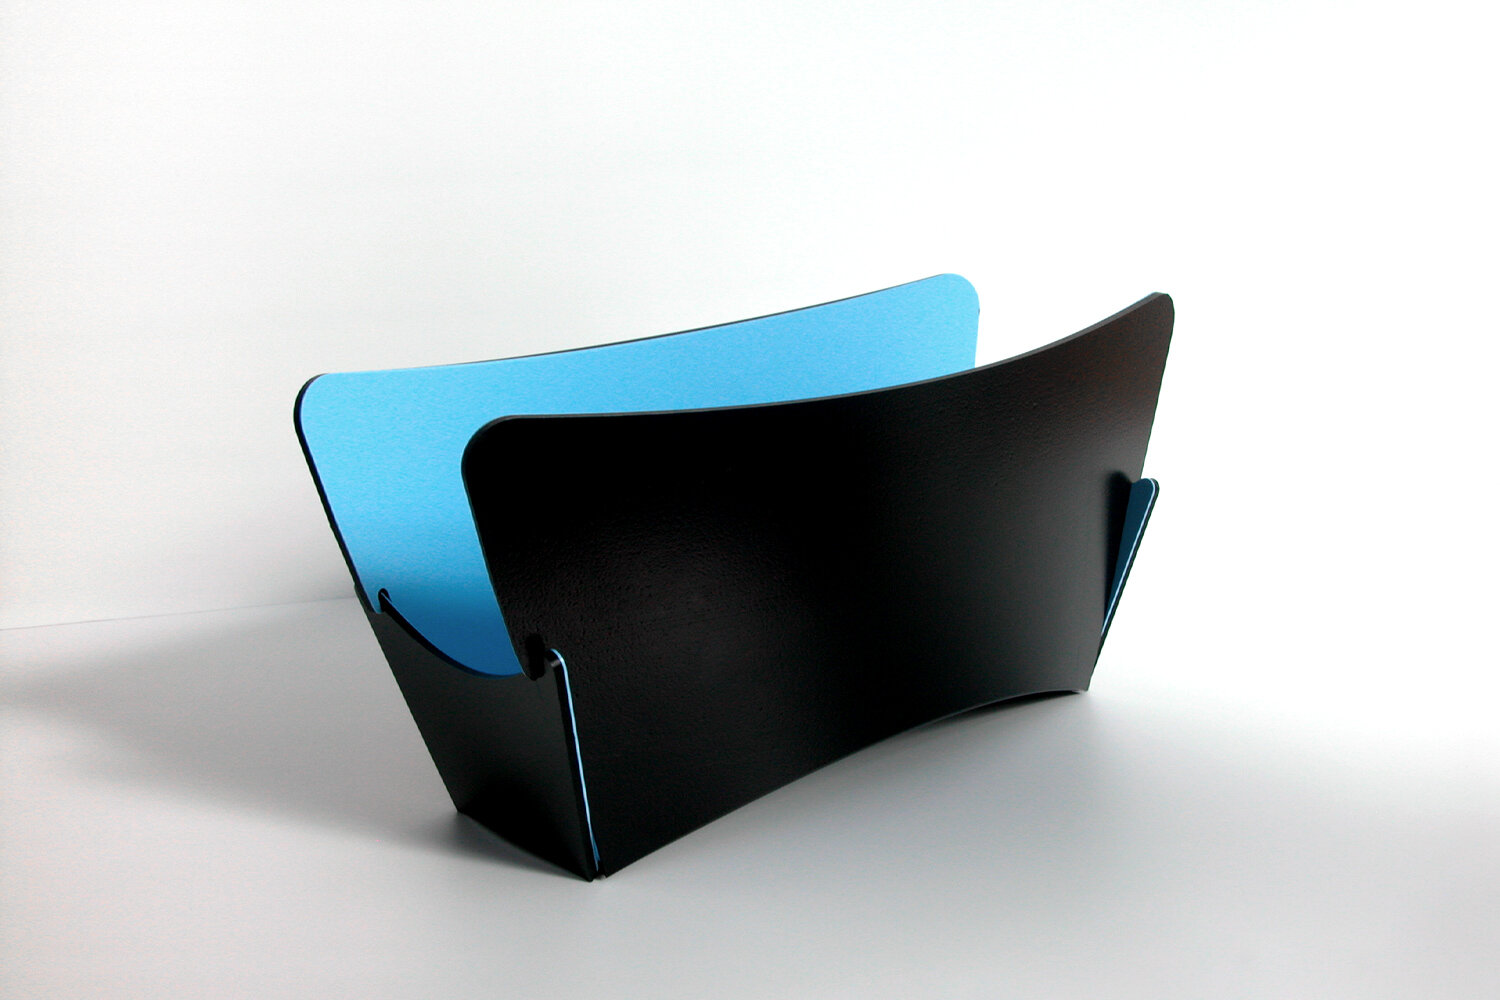 Blue-Marmalade-Crease-foldable-magazine-holder-fan-recycled-plastic-living-room-black-blue-zero-waste-recyclable.jpg